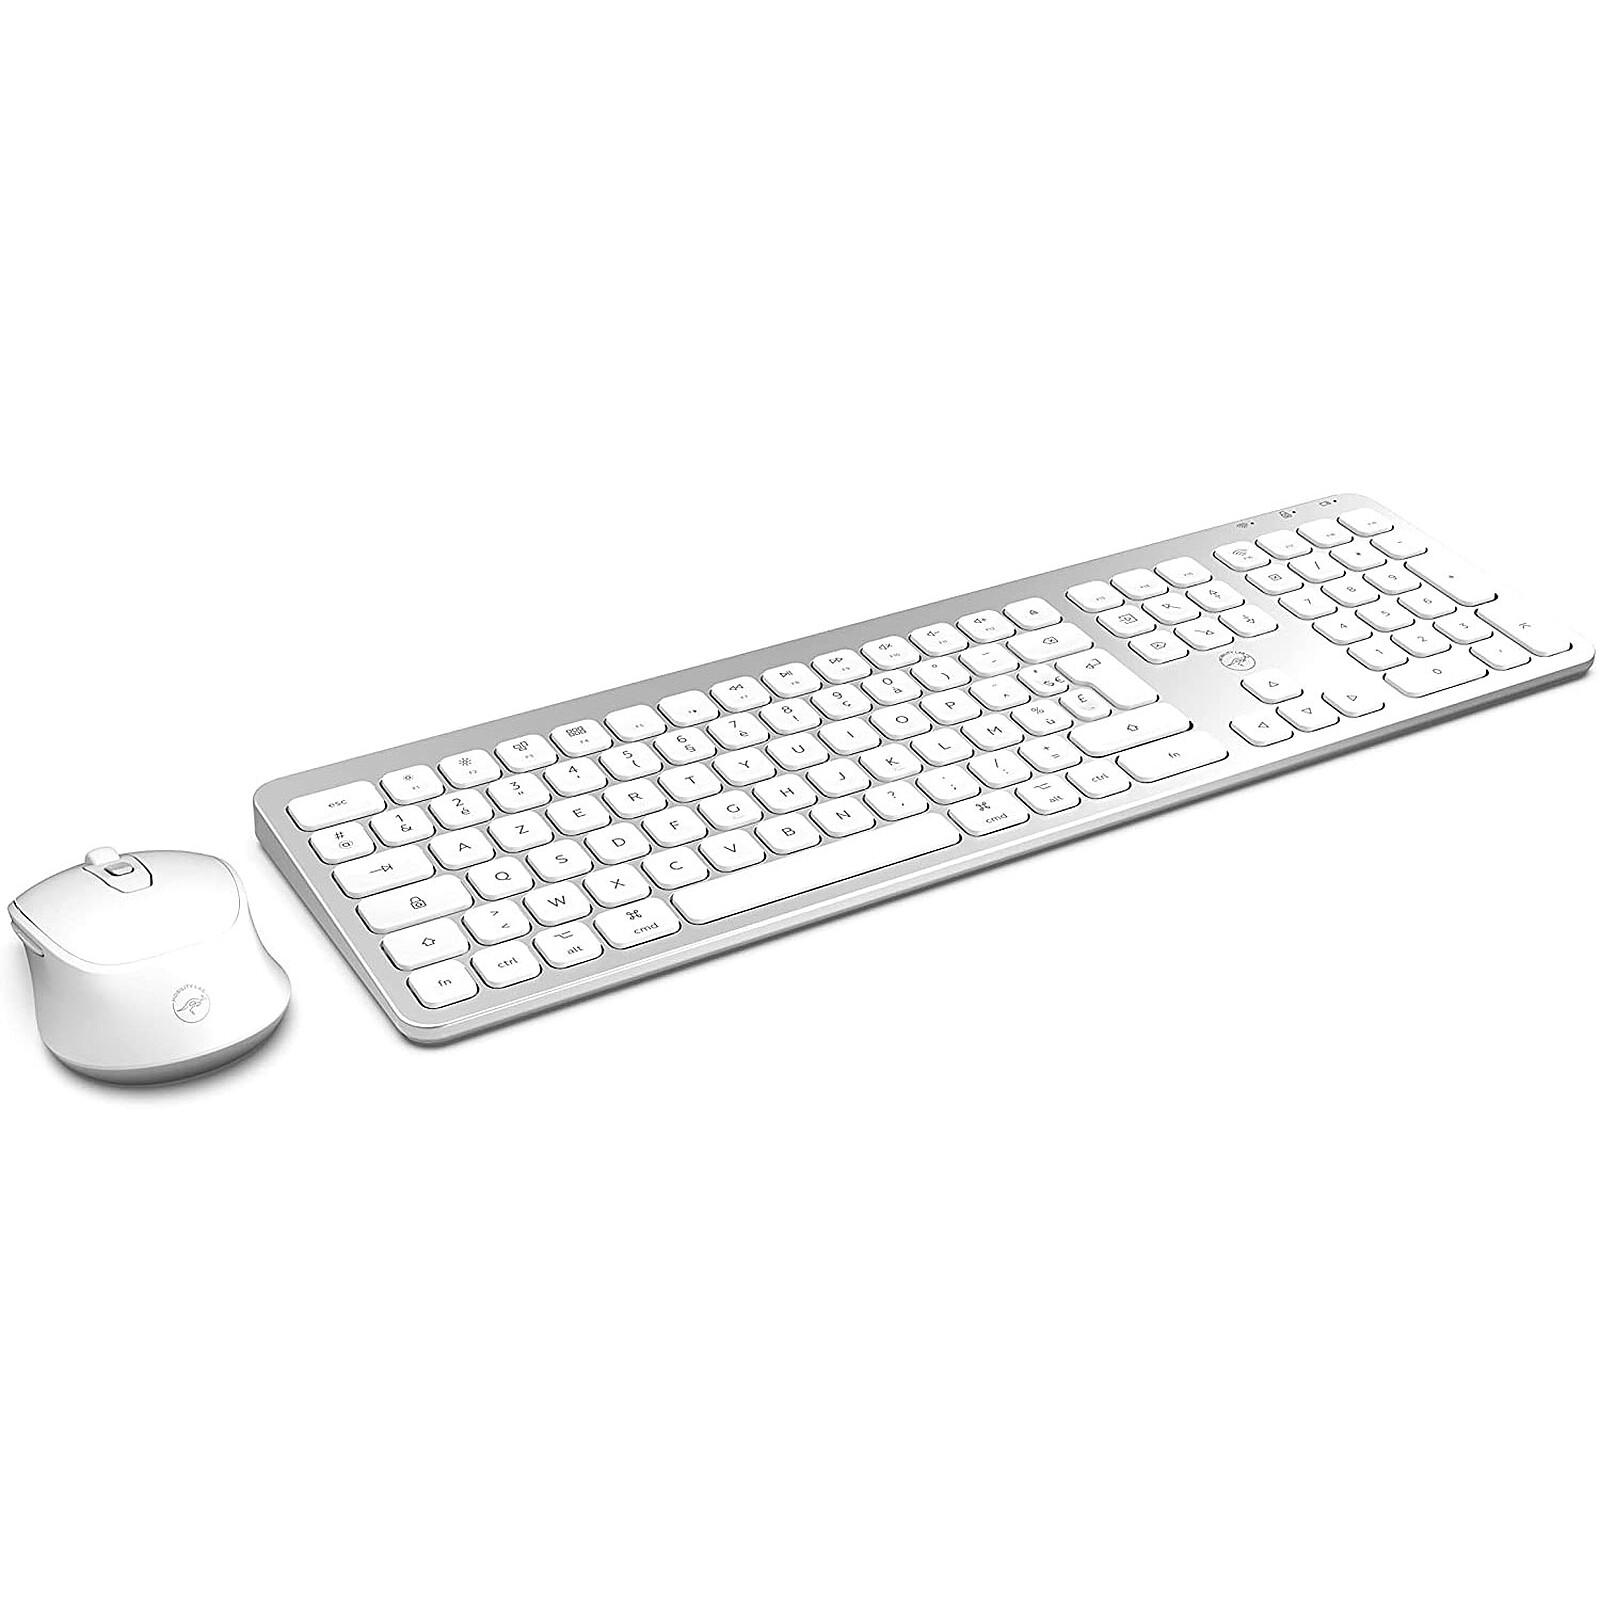 Mobility Lab Wireless Design Touch for MAC - Clavier - sans fil